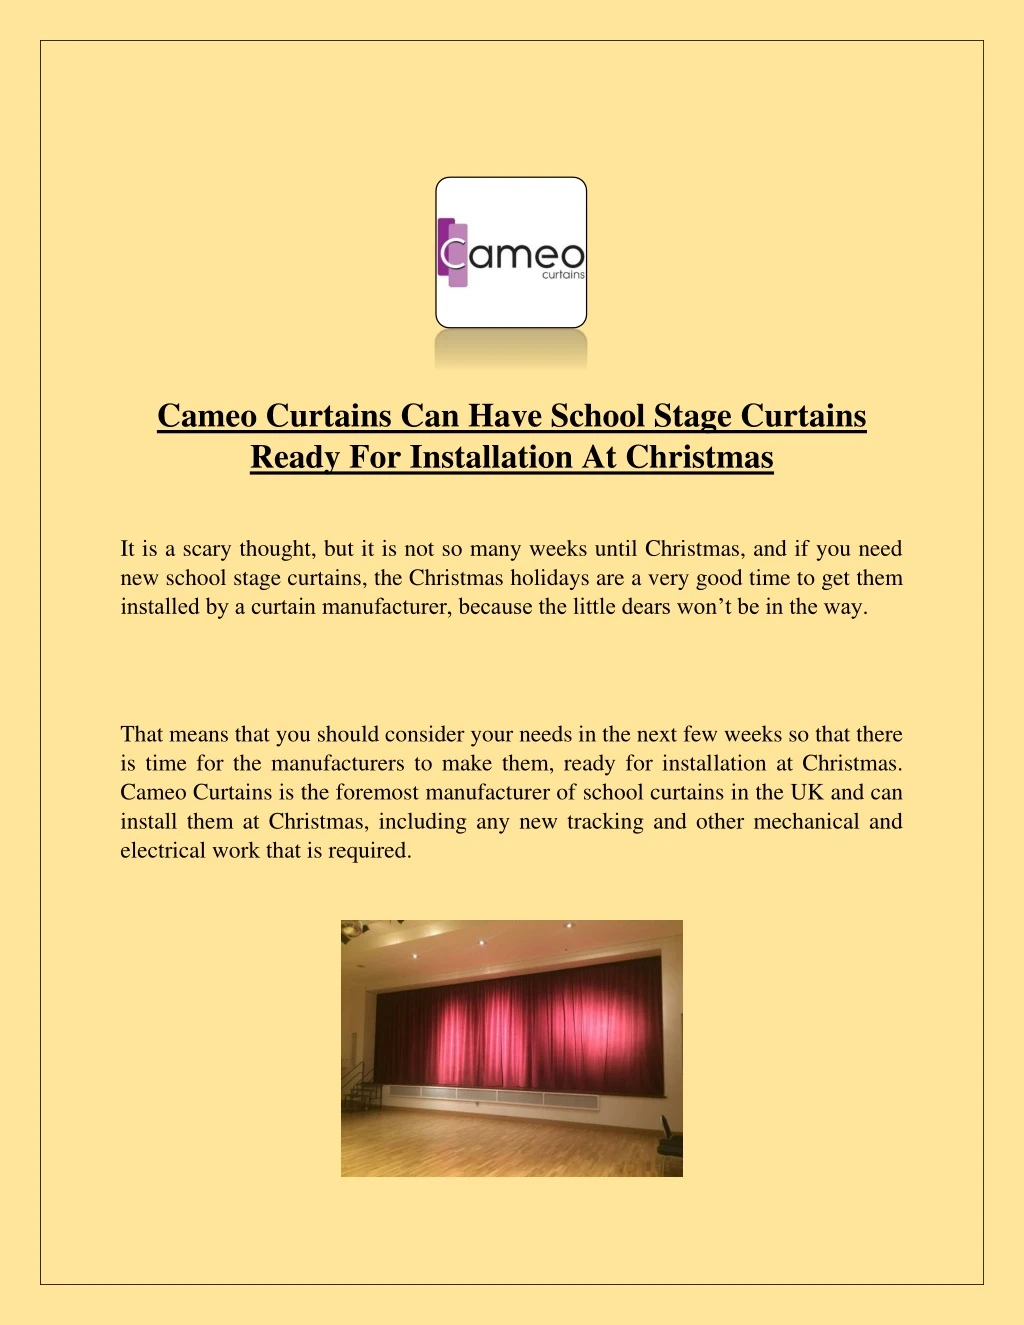 cameo curtains can have school stage curtains